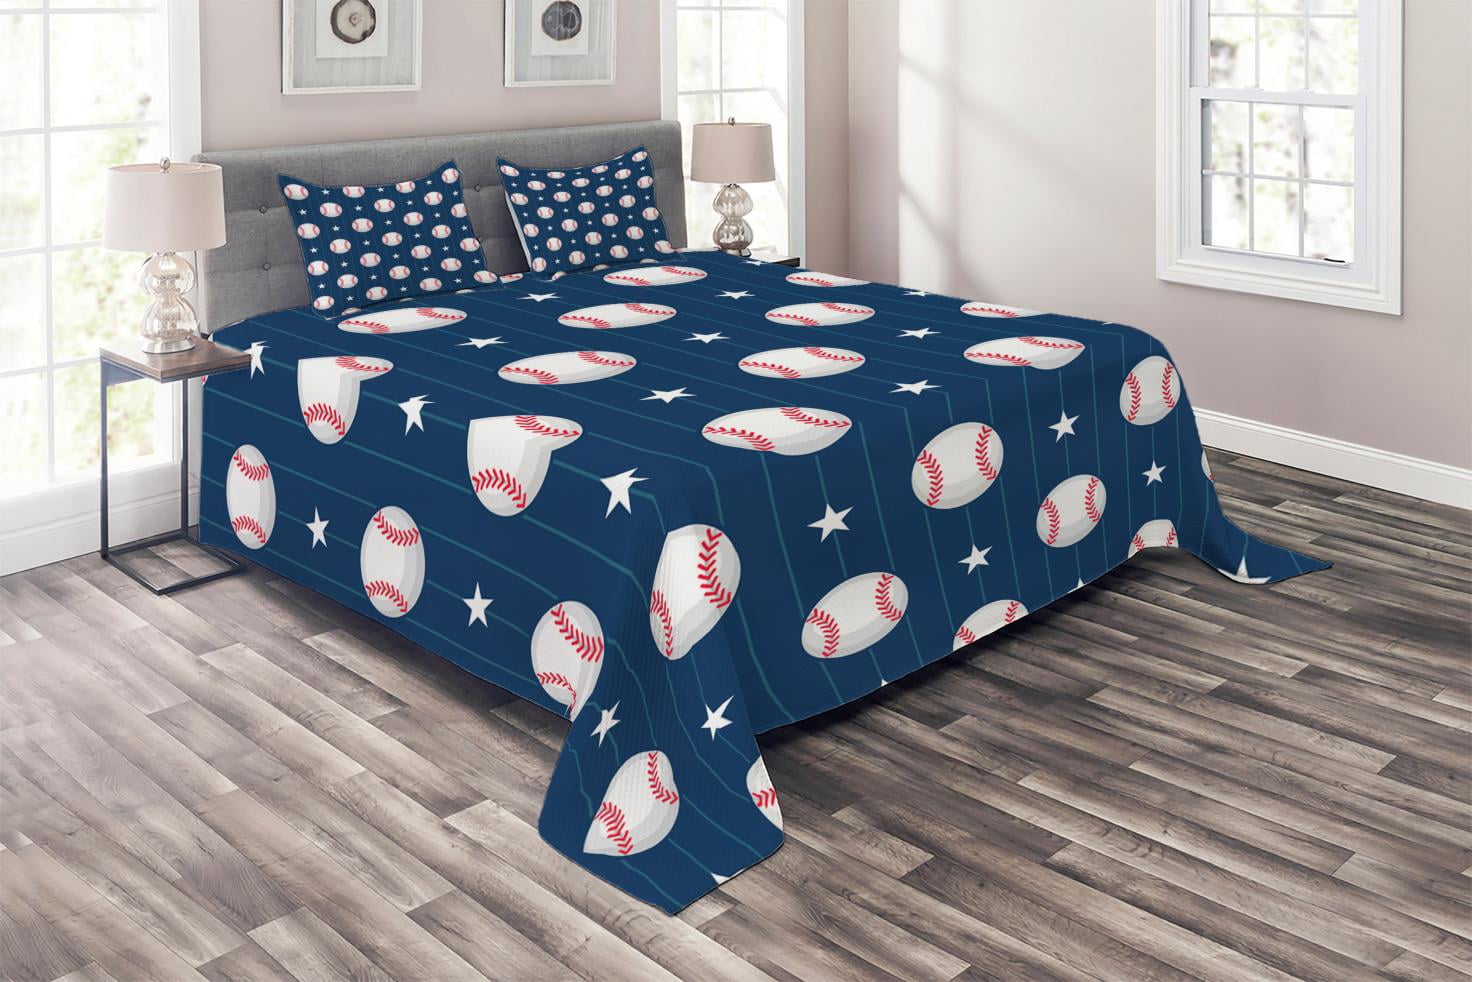 2 Piece Bedding Set with 1 Pillow Sham Twin / Twin XL Size Soccer Ball and Old Plaster Wall Damage Destruction Punching Illustration Sports Decor Duvet Cover Set by Ambesonne